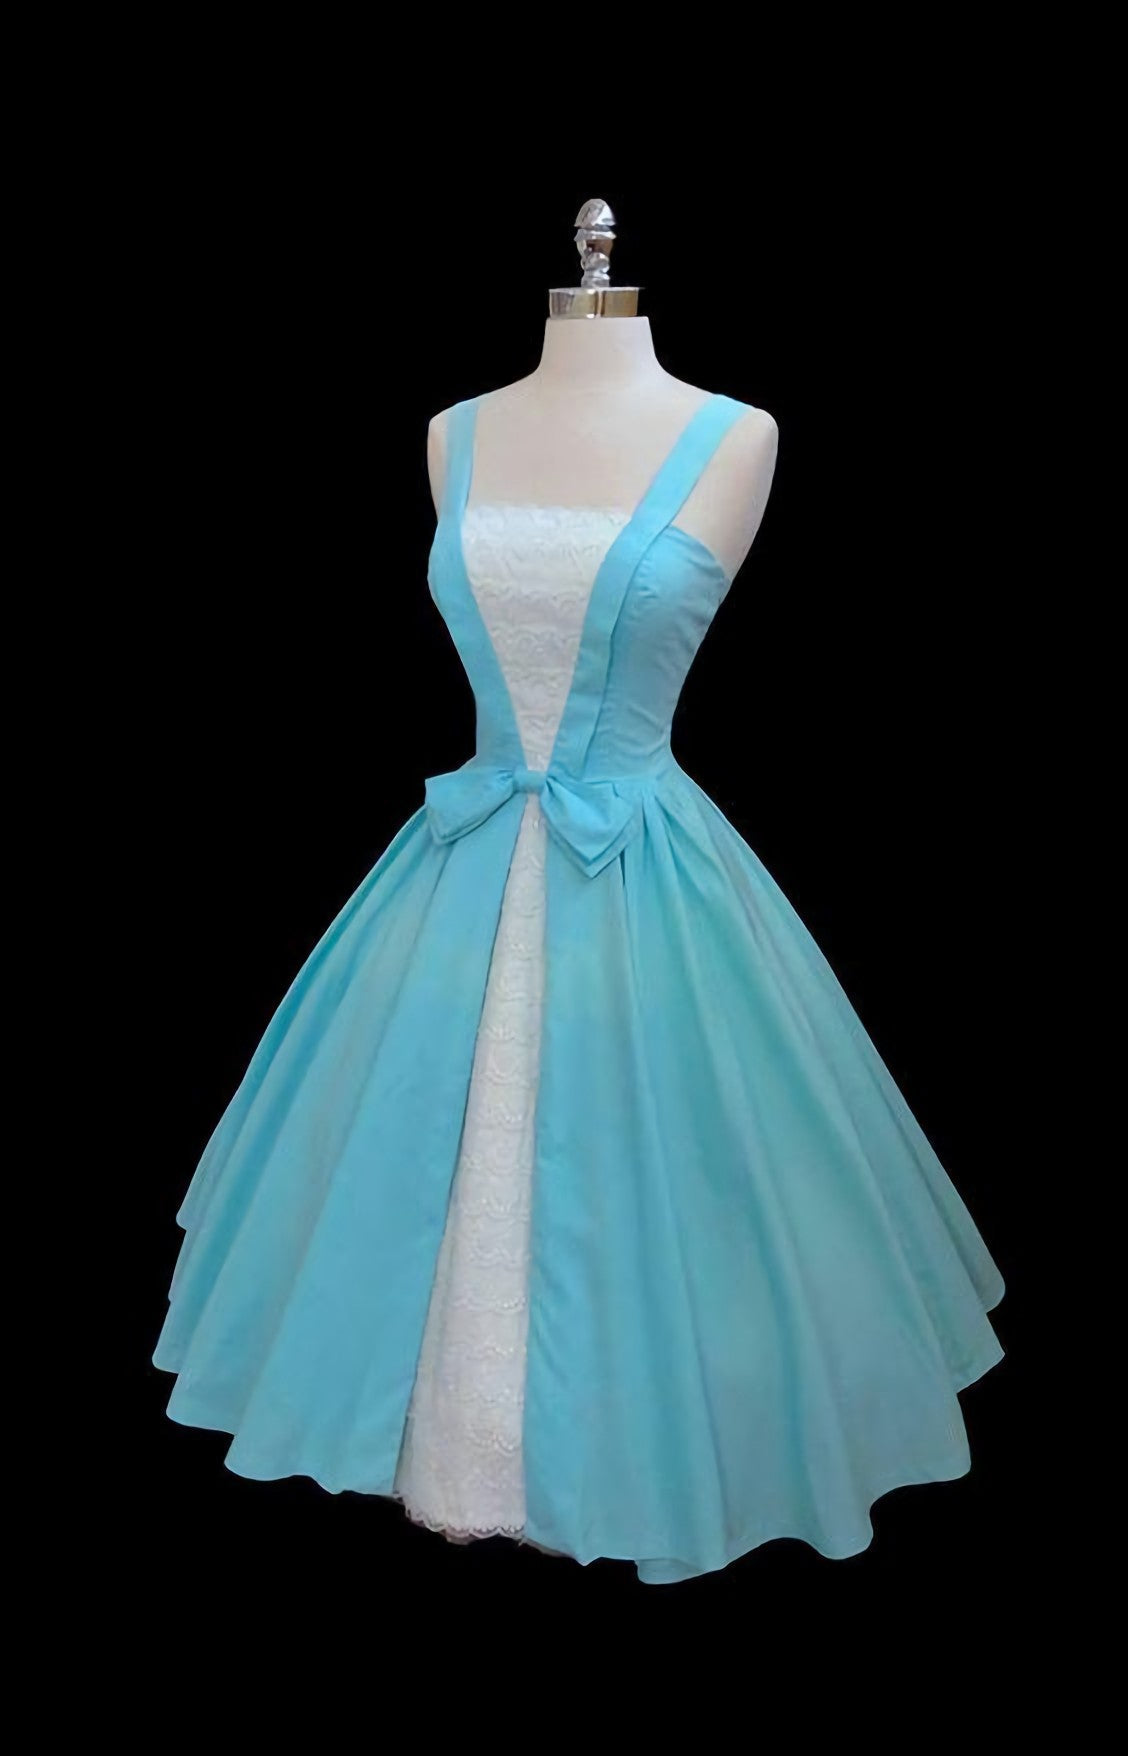 Homecoming Dress, New Cheap Vintage Ball Gown Homecoming Dresses